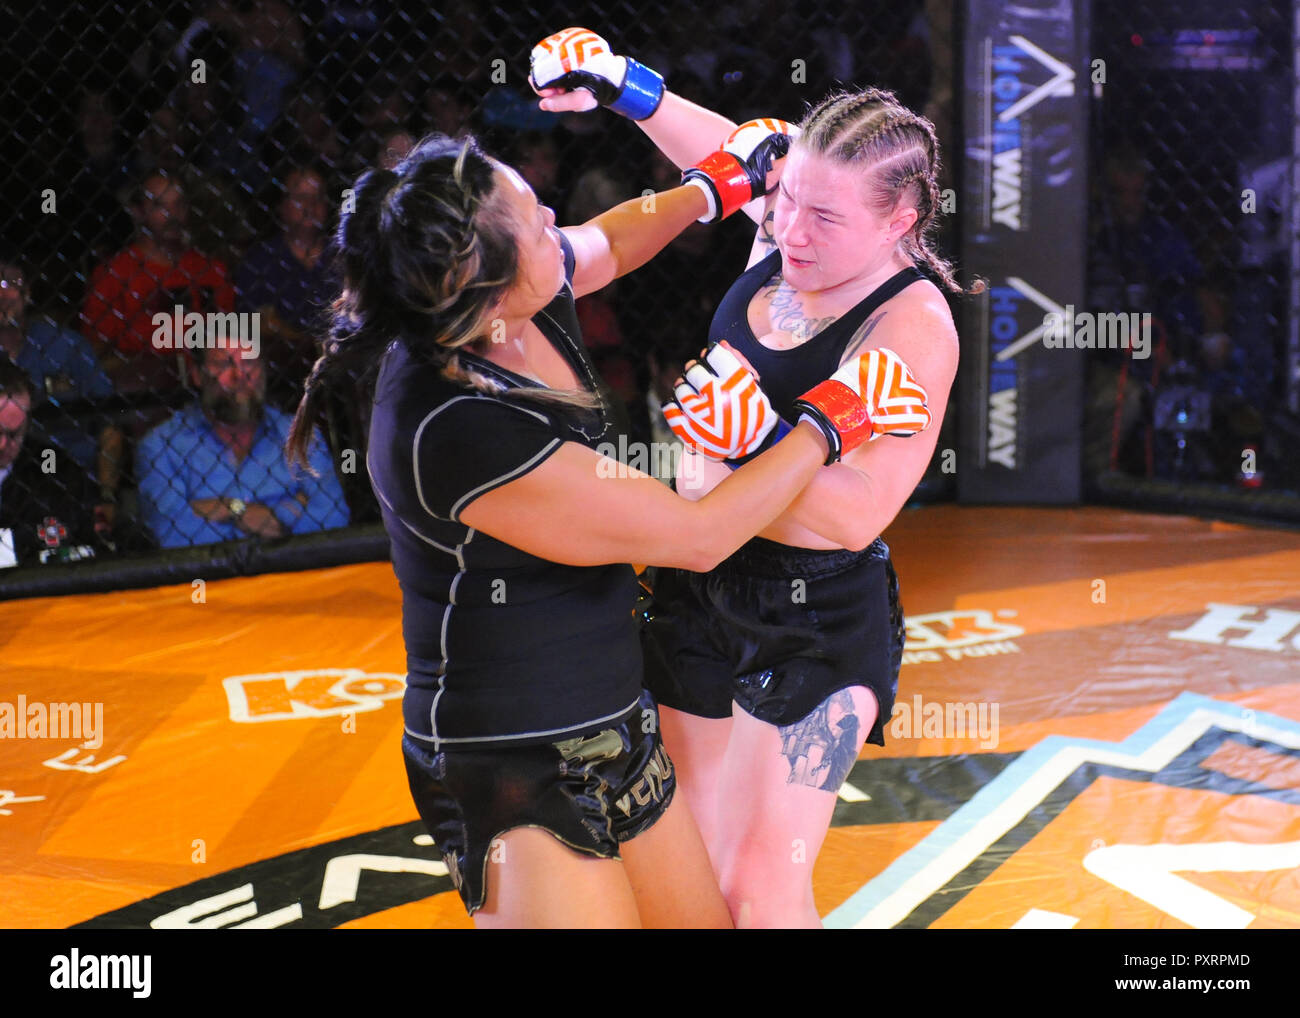 October 20, 2018: MMA fighter, Cameron Pollard (right), with the roundhouse  punch to Toni Tallman (left), during V3 FIGHTS 70 at the Fitz Casino in  Tunica, MS. Pollard defeated Tallman to win